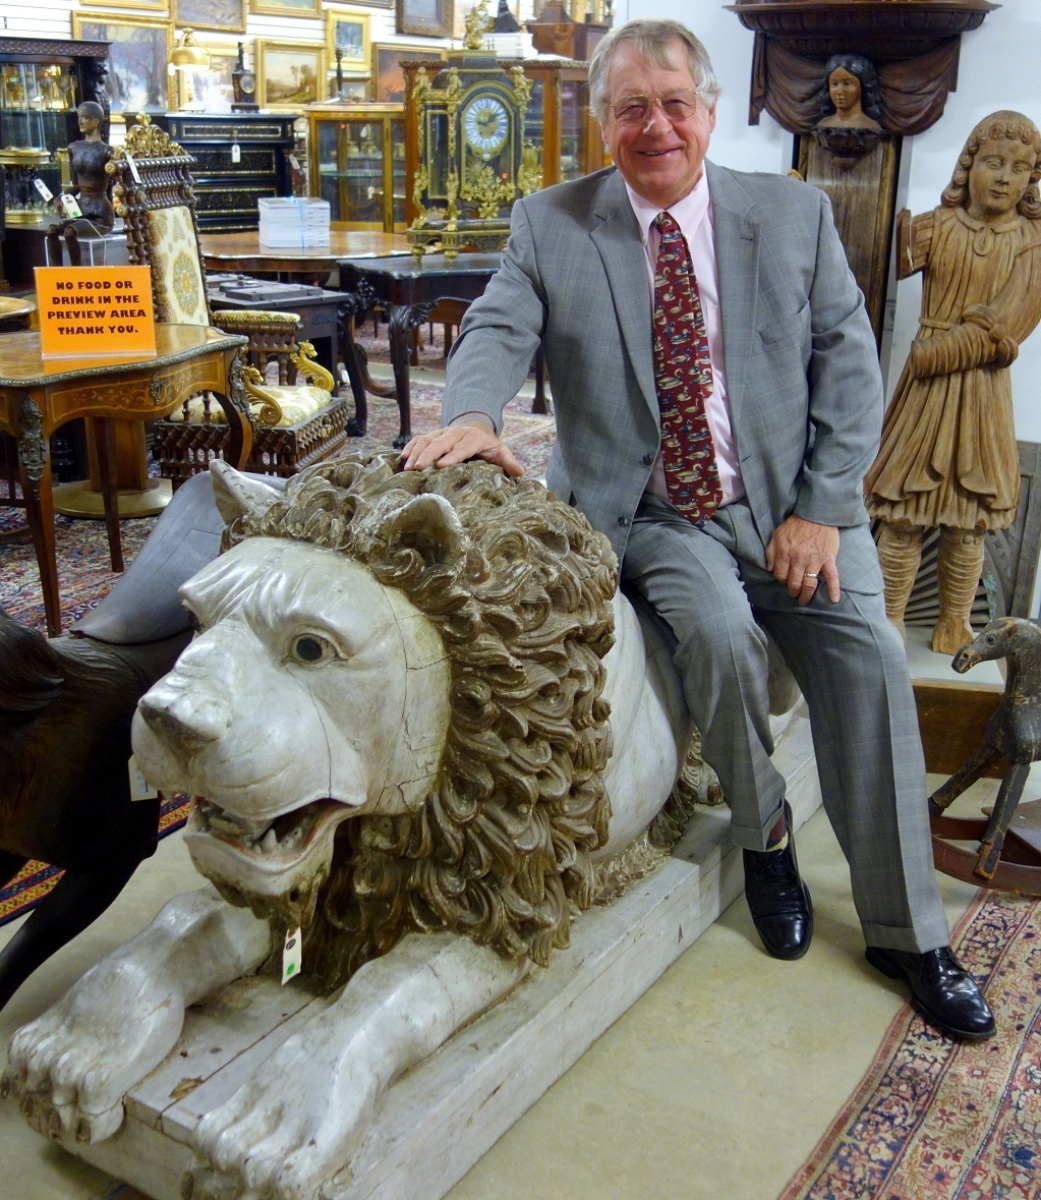 Jim Julia presided over a $3.65 million auction of fine and decorative arts in August 2017.   The lion, a crowd-pleaser, found a new home with Pennsylvania dealer Diana Bittel.